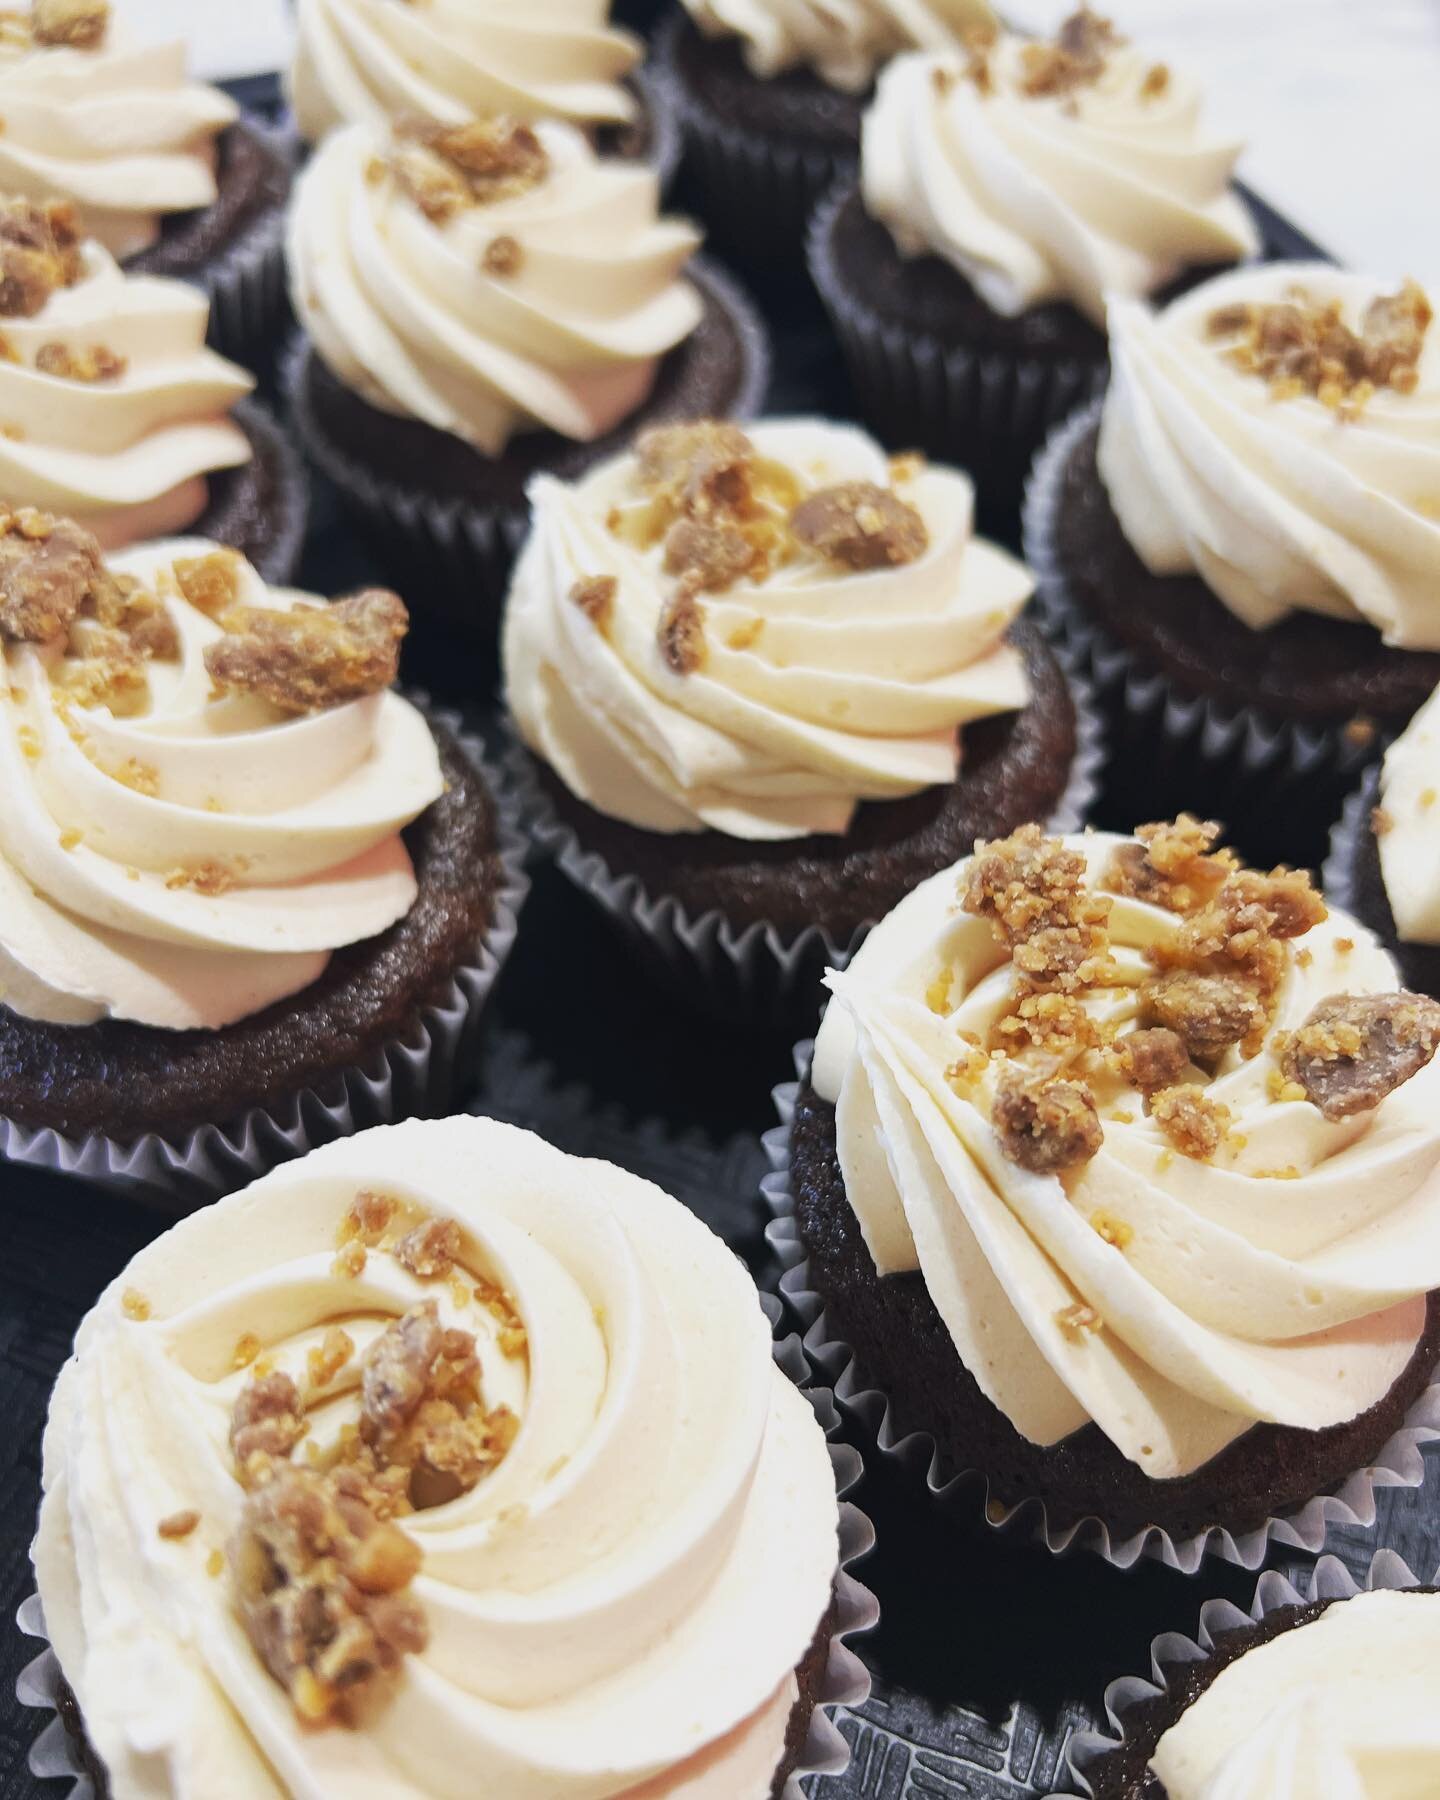 Indulge in these divine chocolate peanut butter cupcakes! 🍫 🥜 🧁 

Menu for Thursday, May 18

Breakfast:
Chocolate Chip Banana Bread

Cookies/Bars:
Brown Butter Krispy Treats
Cookies &amp; Cream Cookies 

Treats:
Lemon Bars 
Mixed Berry Crumb Bars
